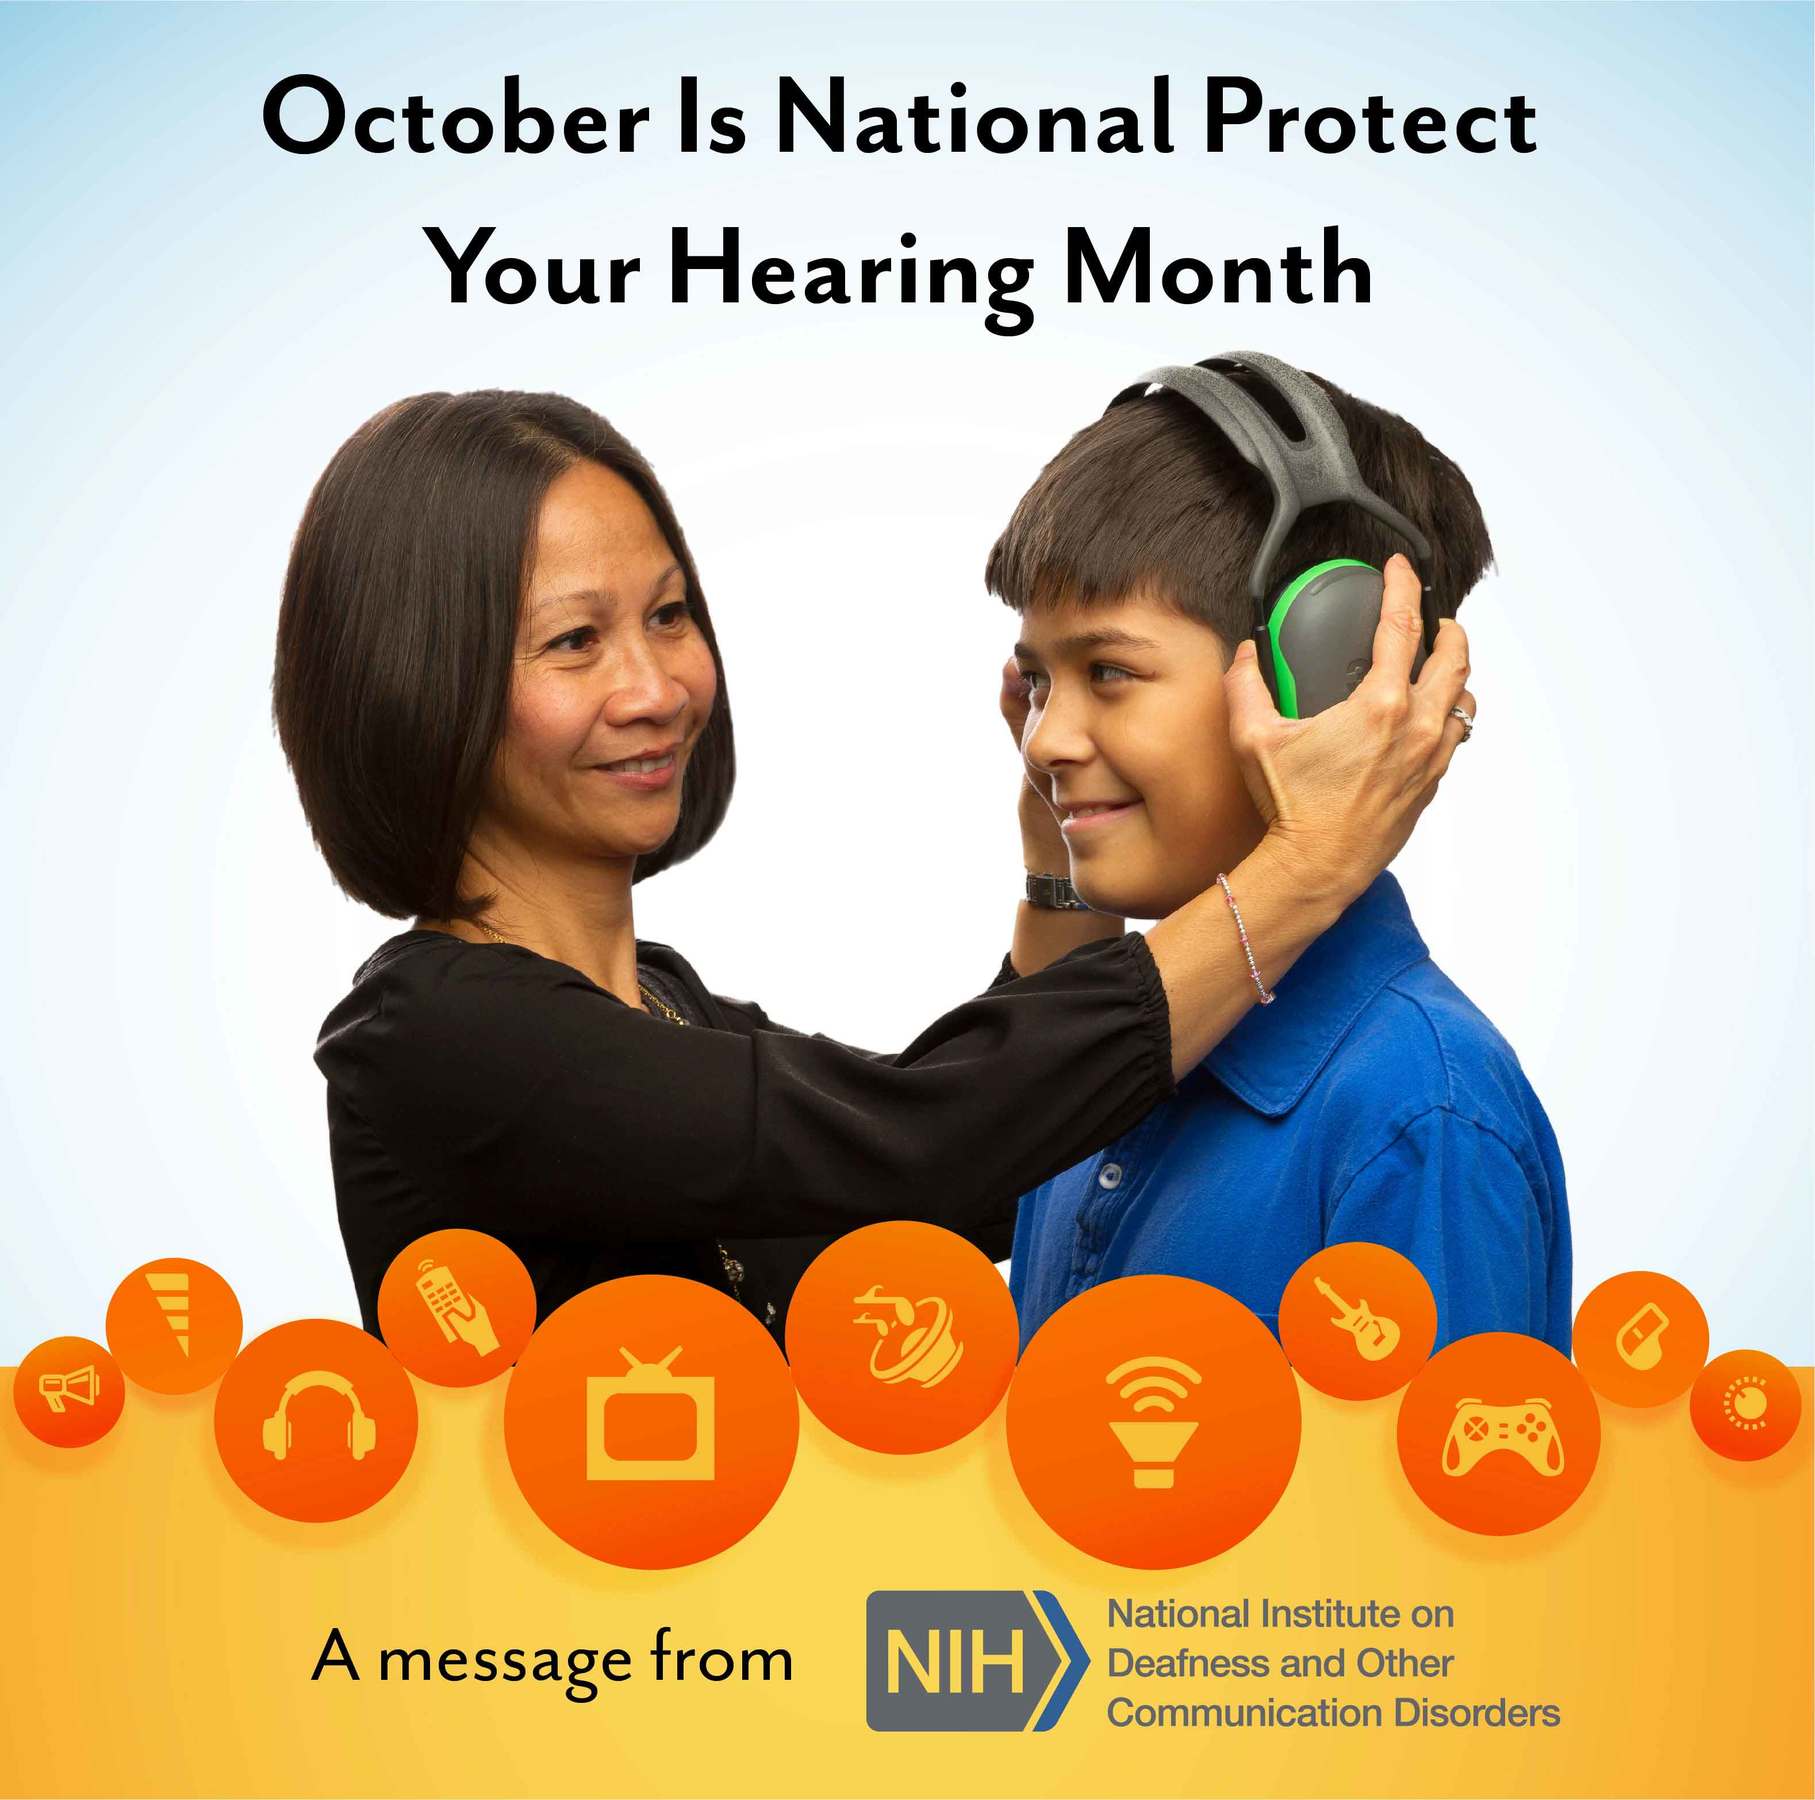 A woman places protective earmuffs on a preteen boy. Text above them reads: October is National Protect Your Hearing Month.